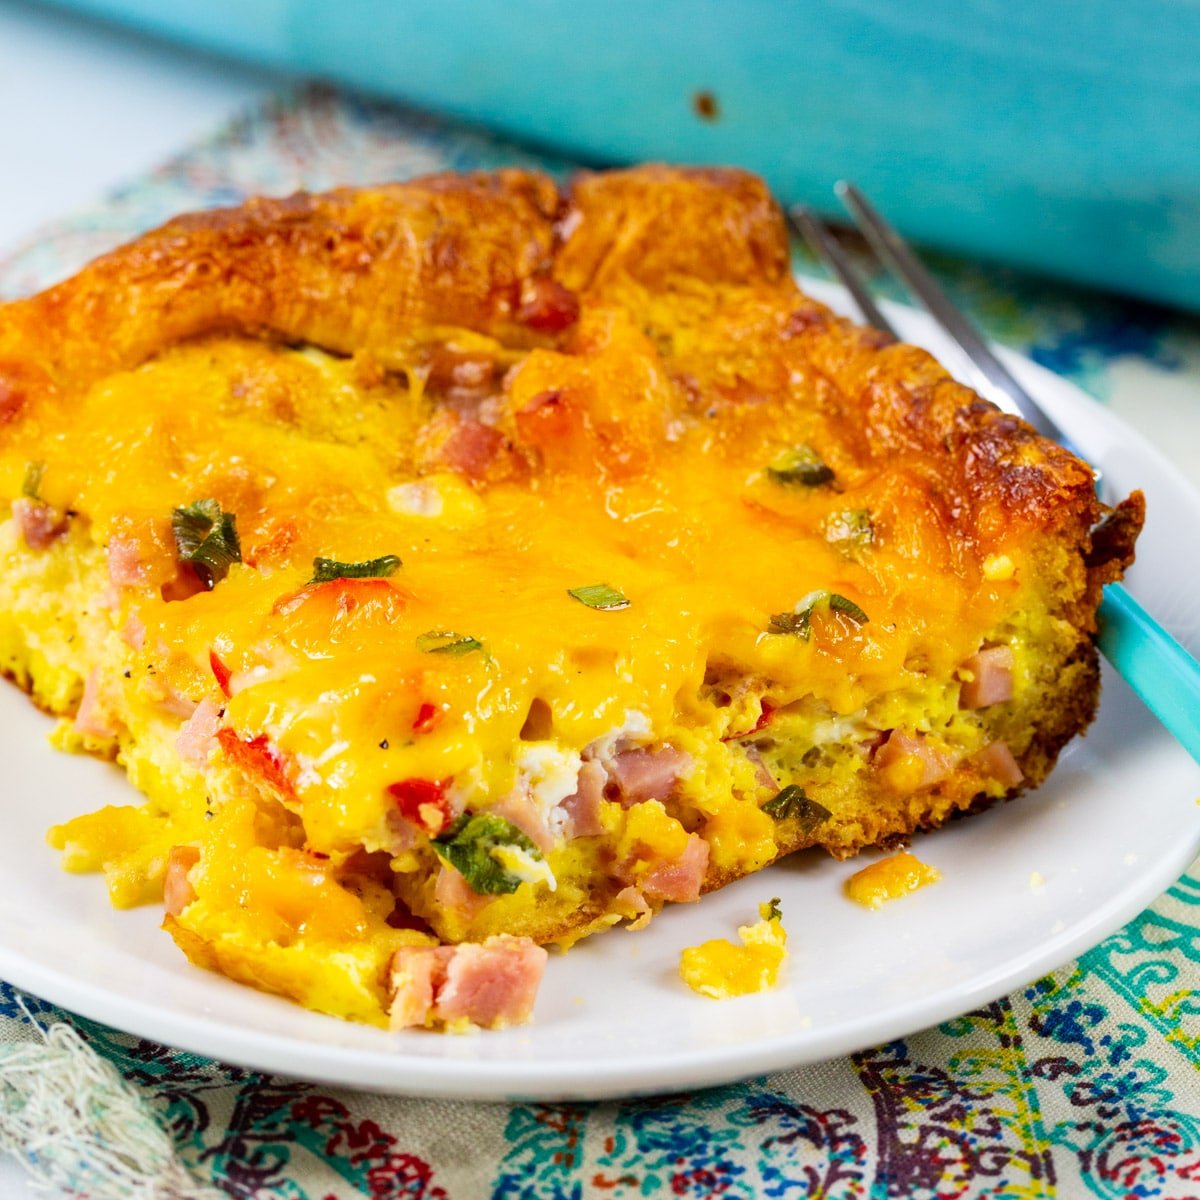 Slice of Ham and Cheese Crescent Casserole on a plate.